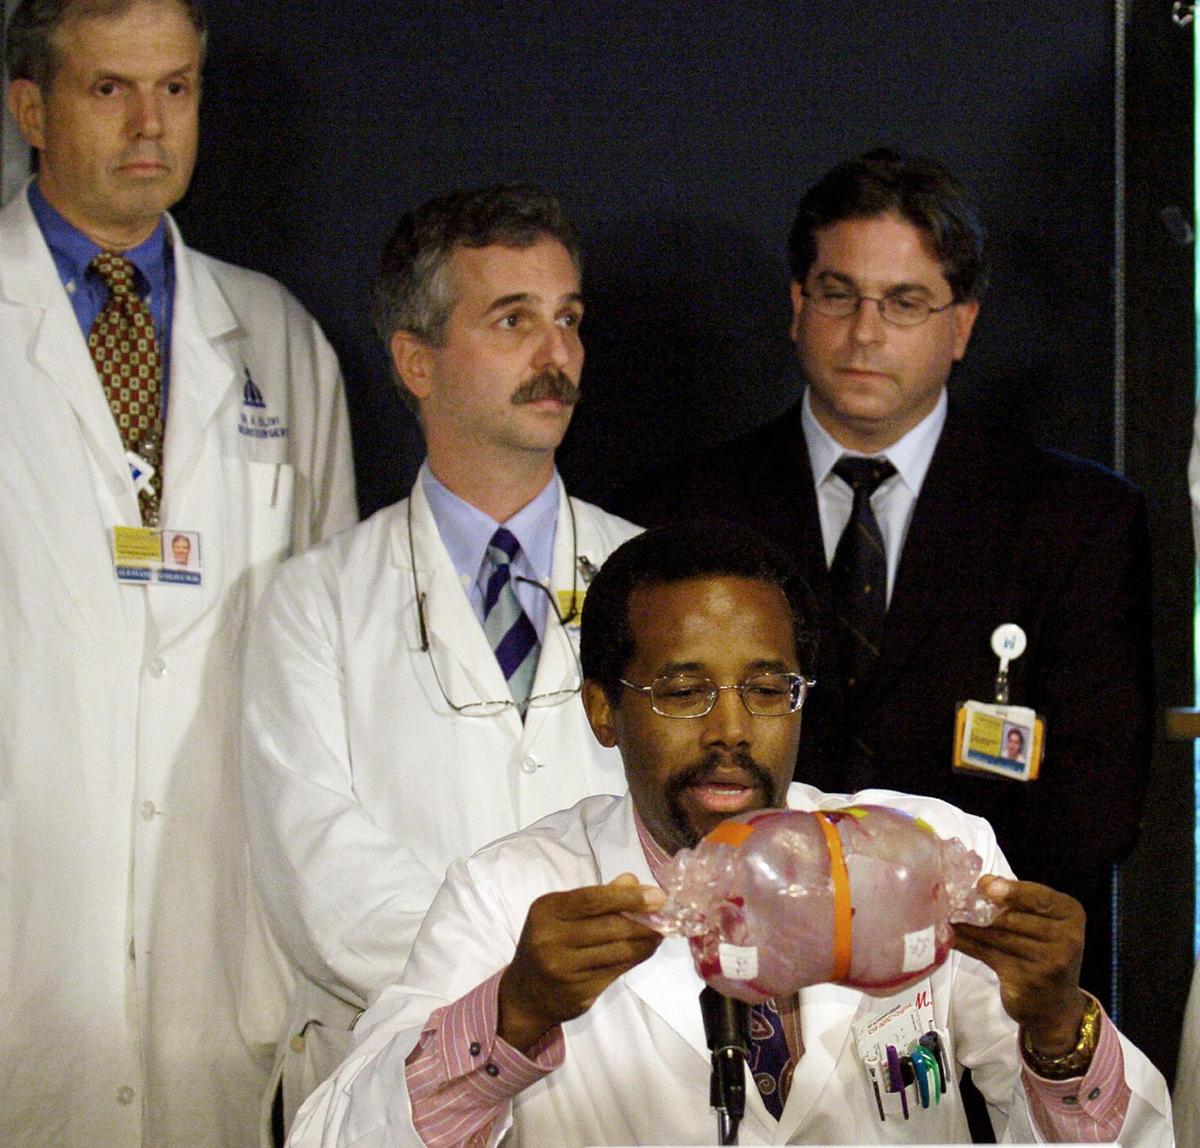 Johns Hopkins Children's Center Neurosurgeon Benjamin Carson (C) holds a model of the conjoined twins Lea and Tabea Block during a press conference, in Baltimore, Maryland on 16 Sept., 2004. (MIKE THEILER/AFP/Getty Images)